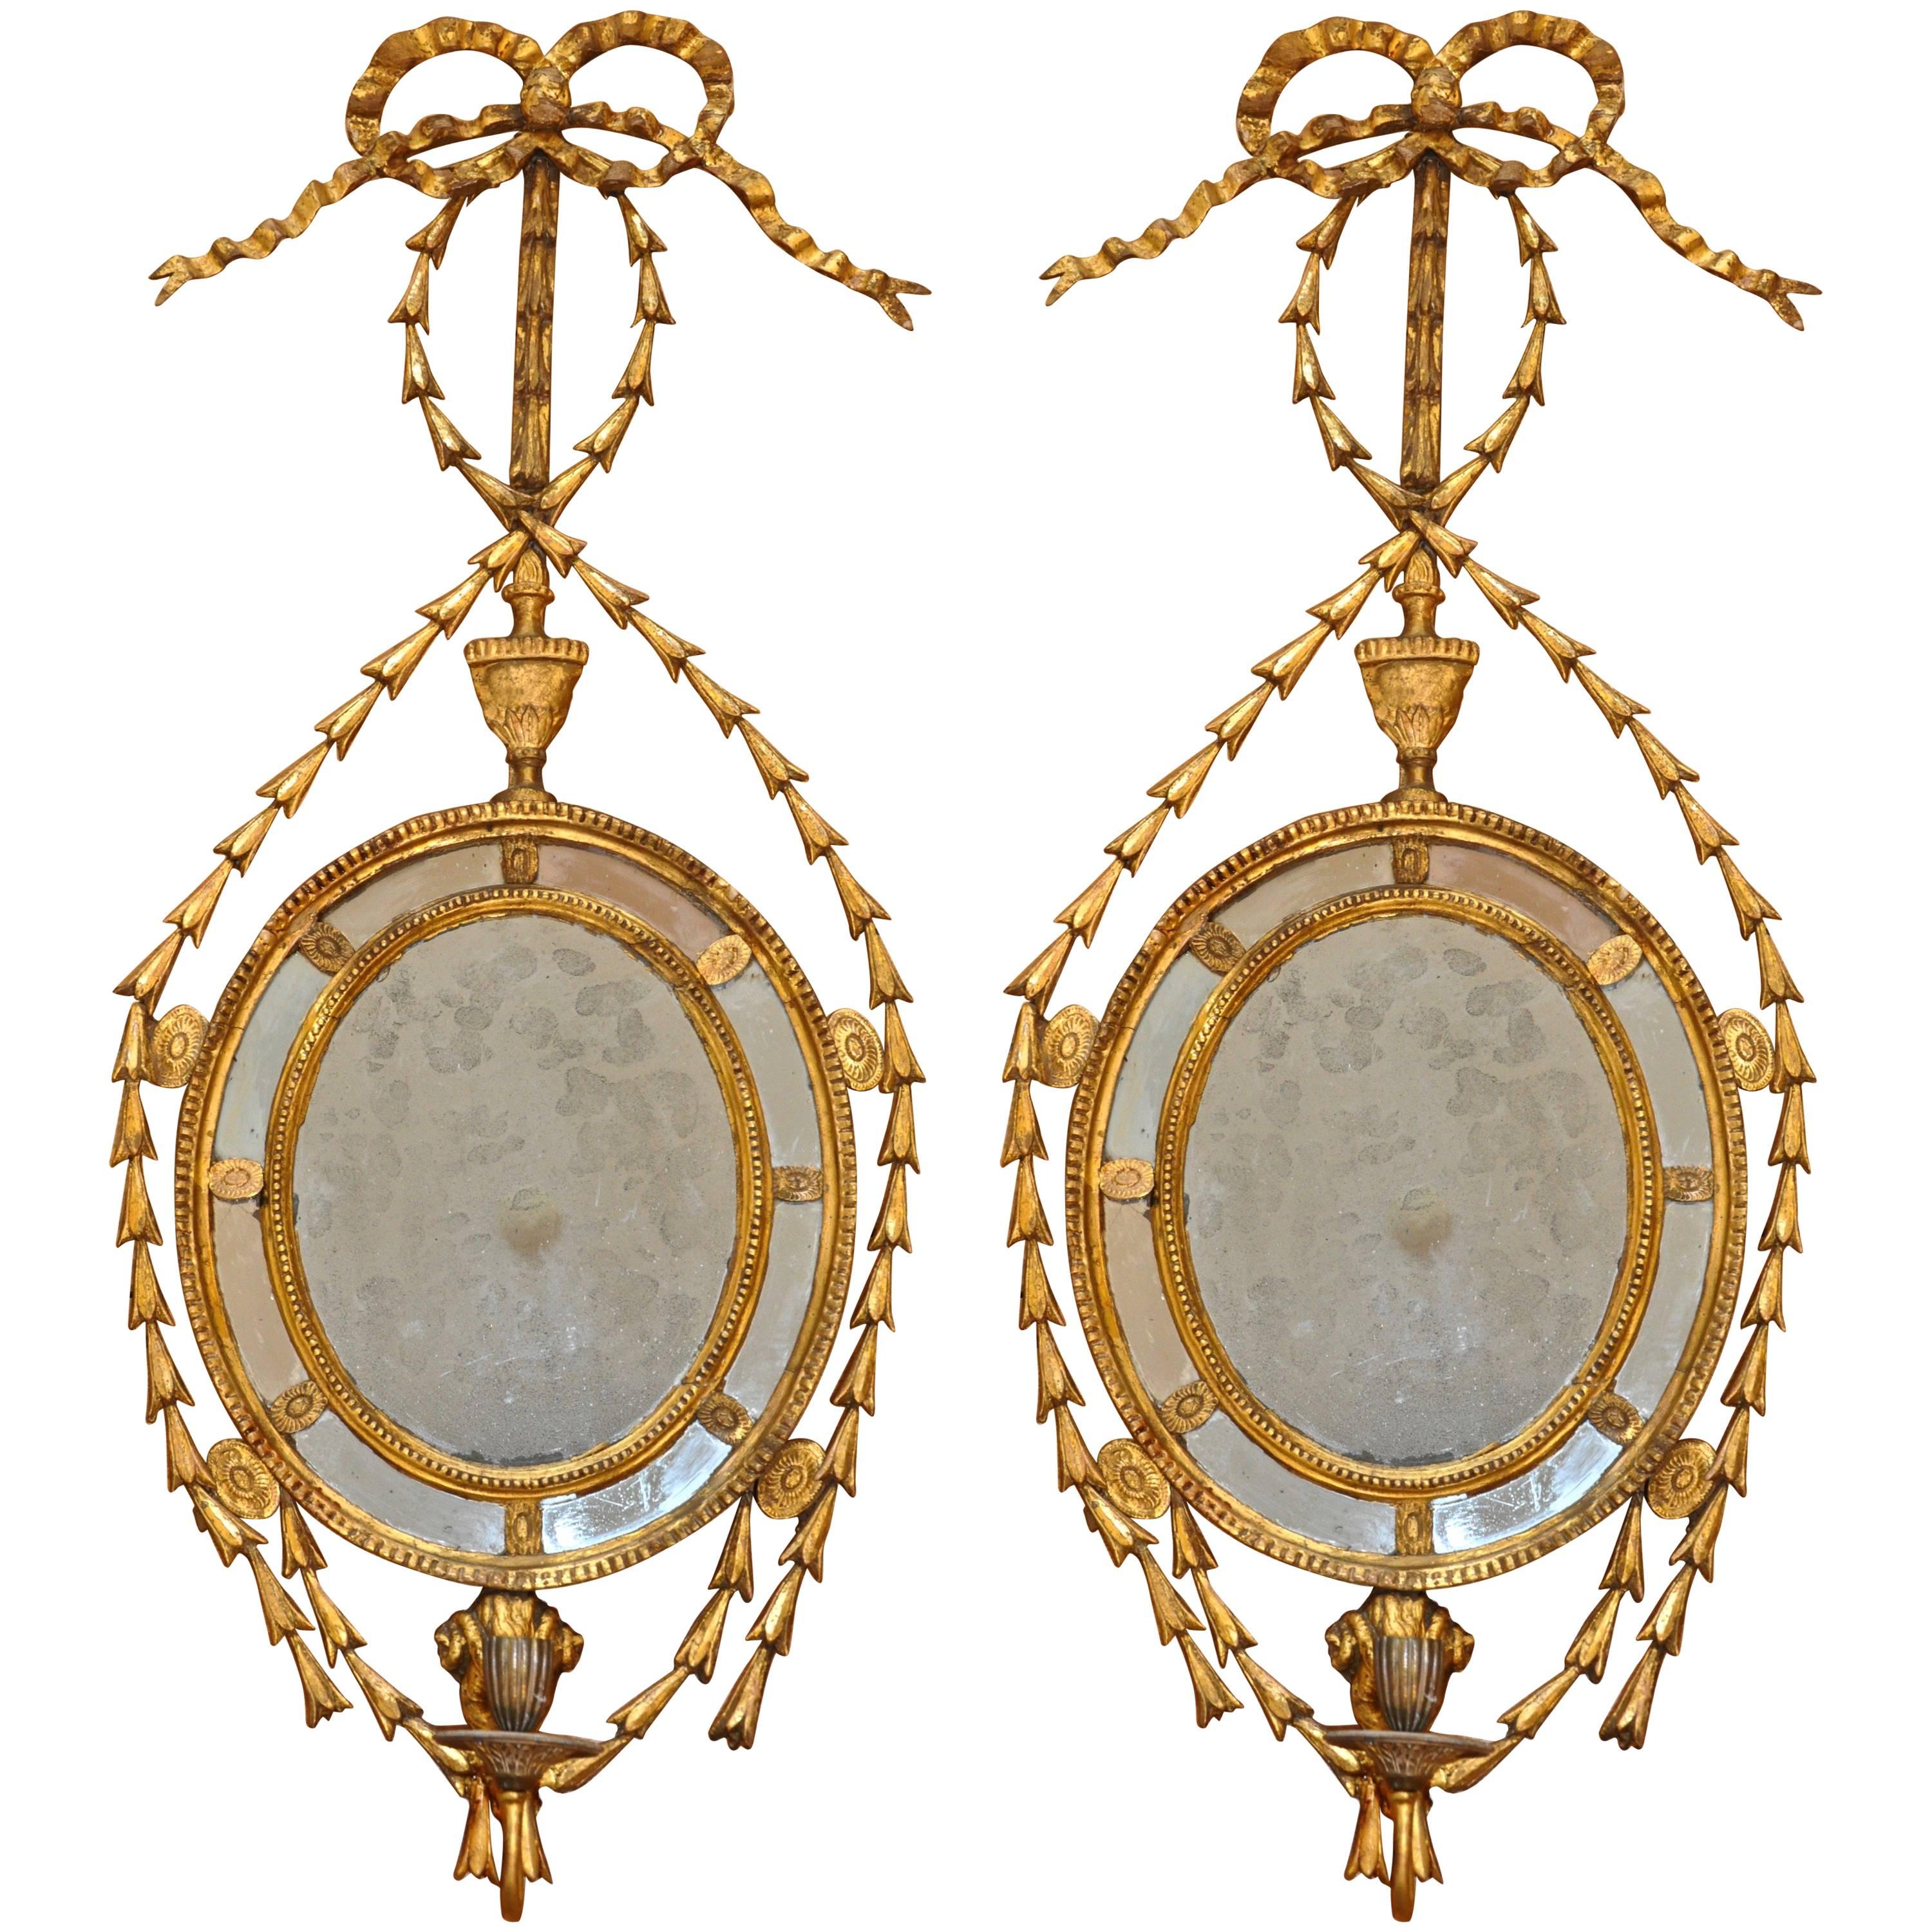 Pair of Period Gilt Adam Mirrored Sconces with Ram's Head Motif and Candle Arm